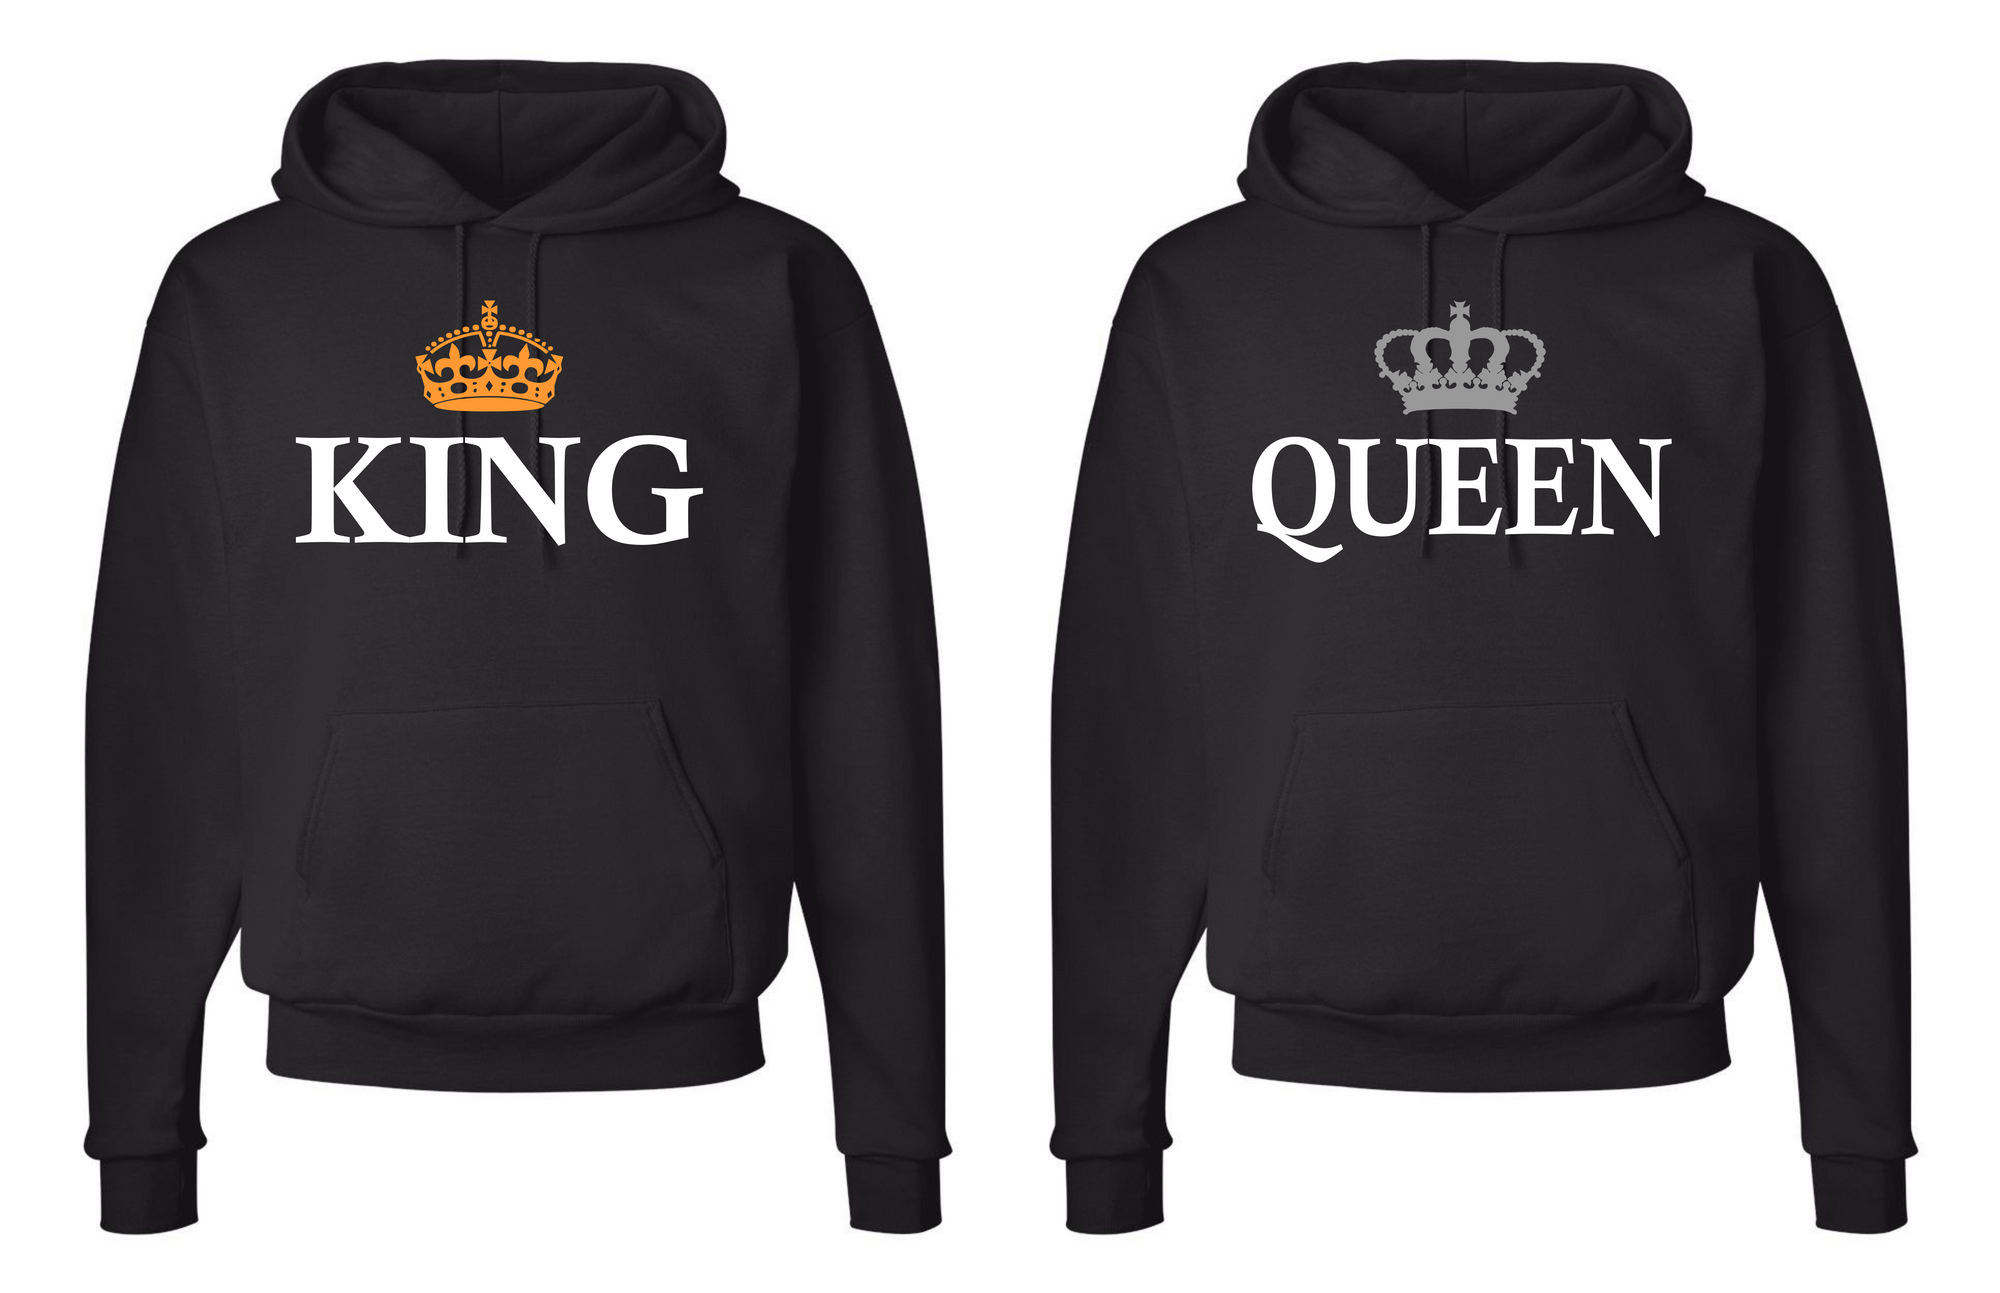 Matching King And Queen Hoodies - Couple Outfits